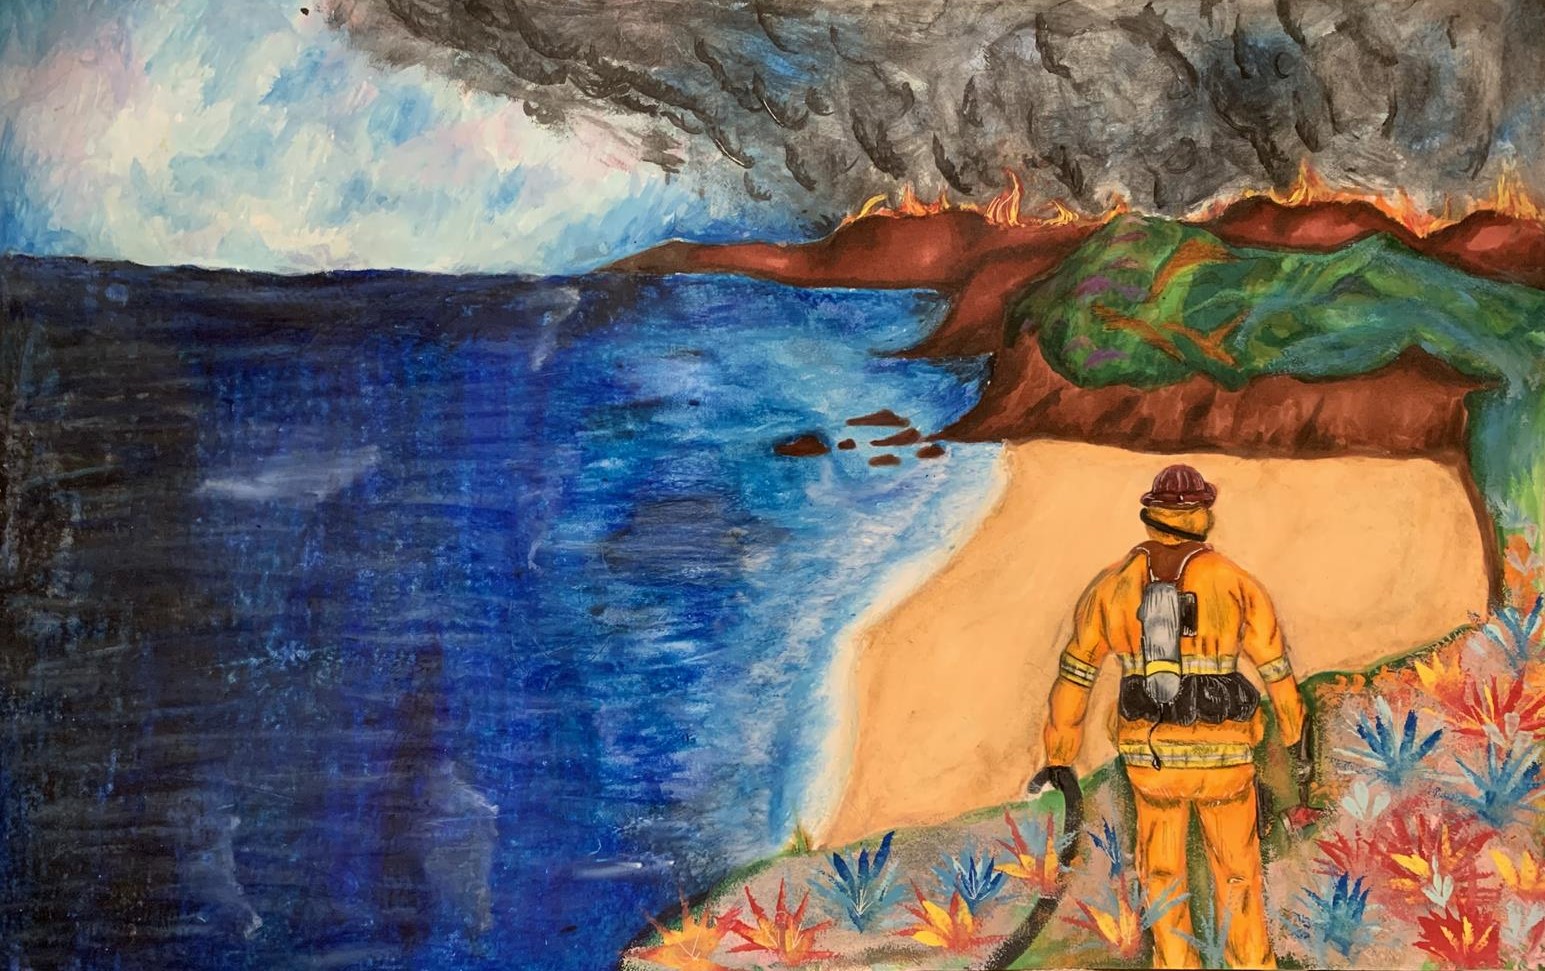 a firefighter stands looking out at the coast. in the distance flames and smoke rise above the bluffs